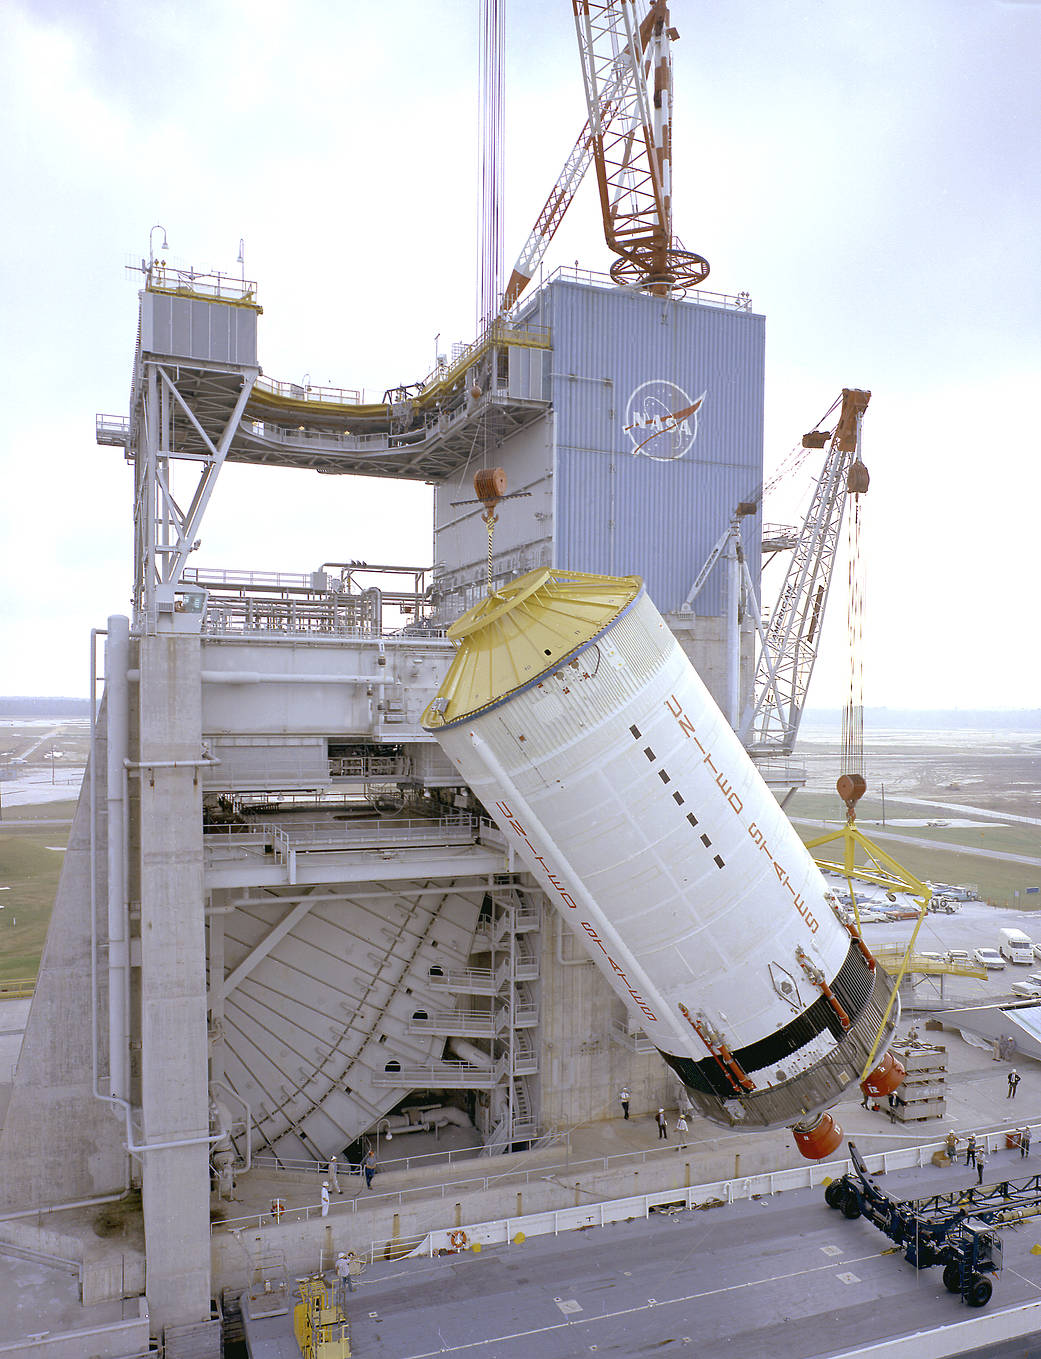 This week in 1968, the Mississippi Test Facility successfully completed the first full-duration static test firing of 1968. 